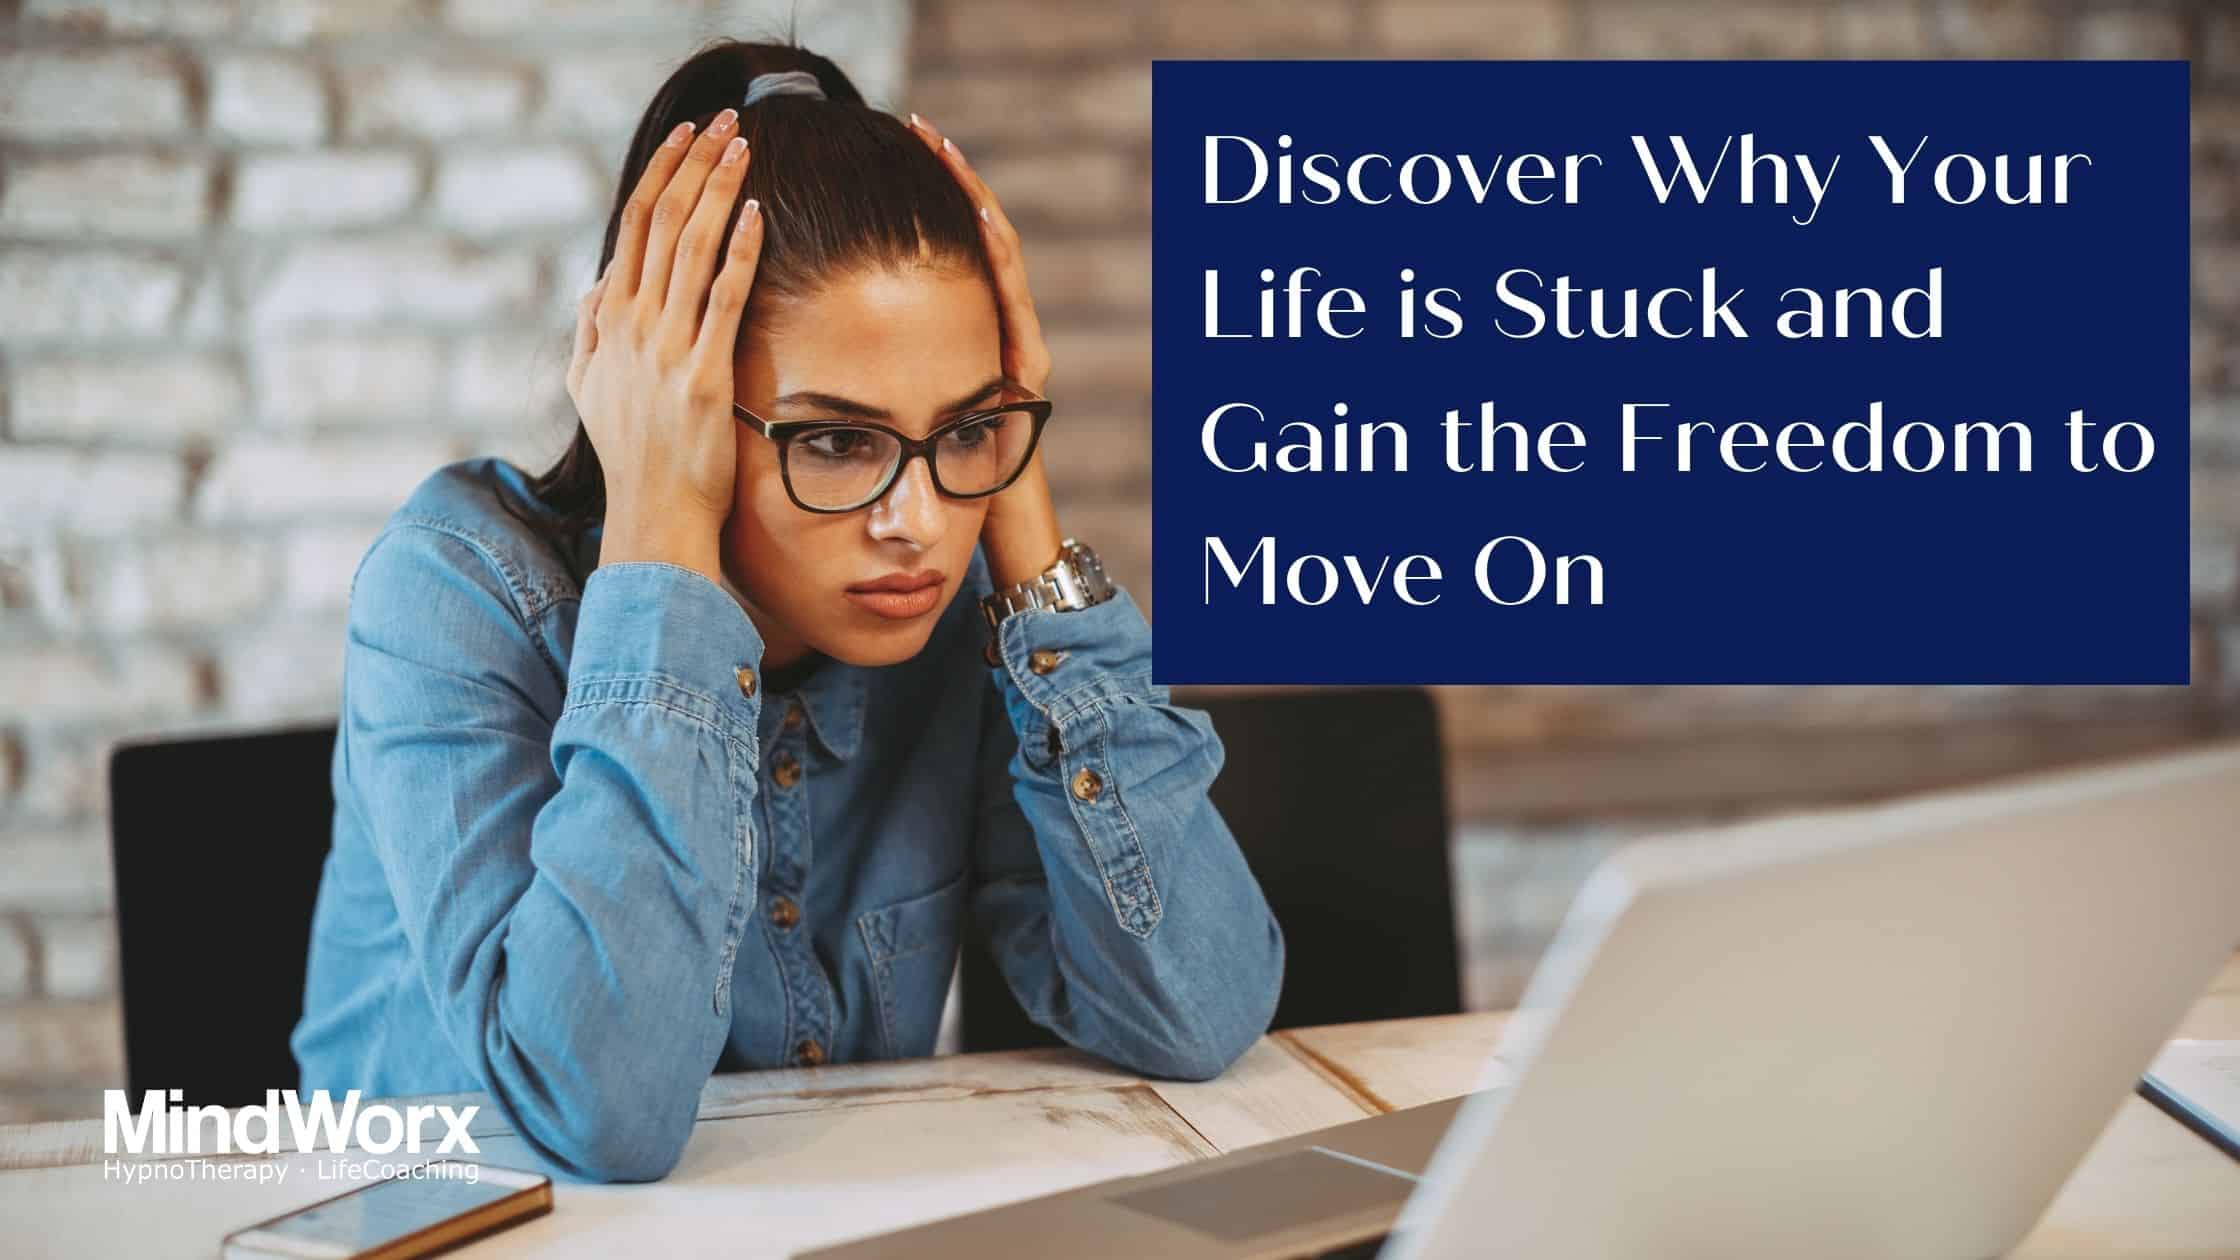 Discover Why Your Life is Stuck and Gain the Freedom to Move On